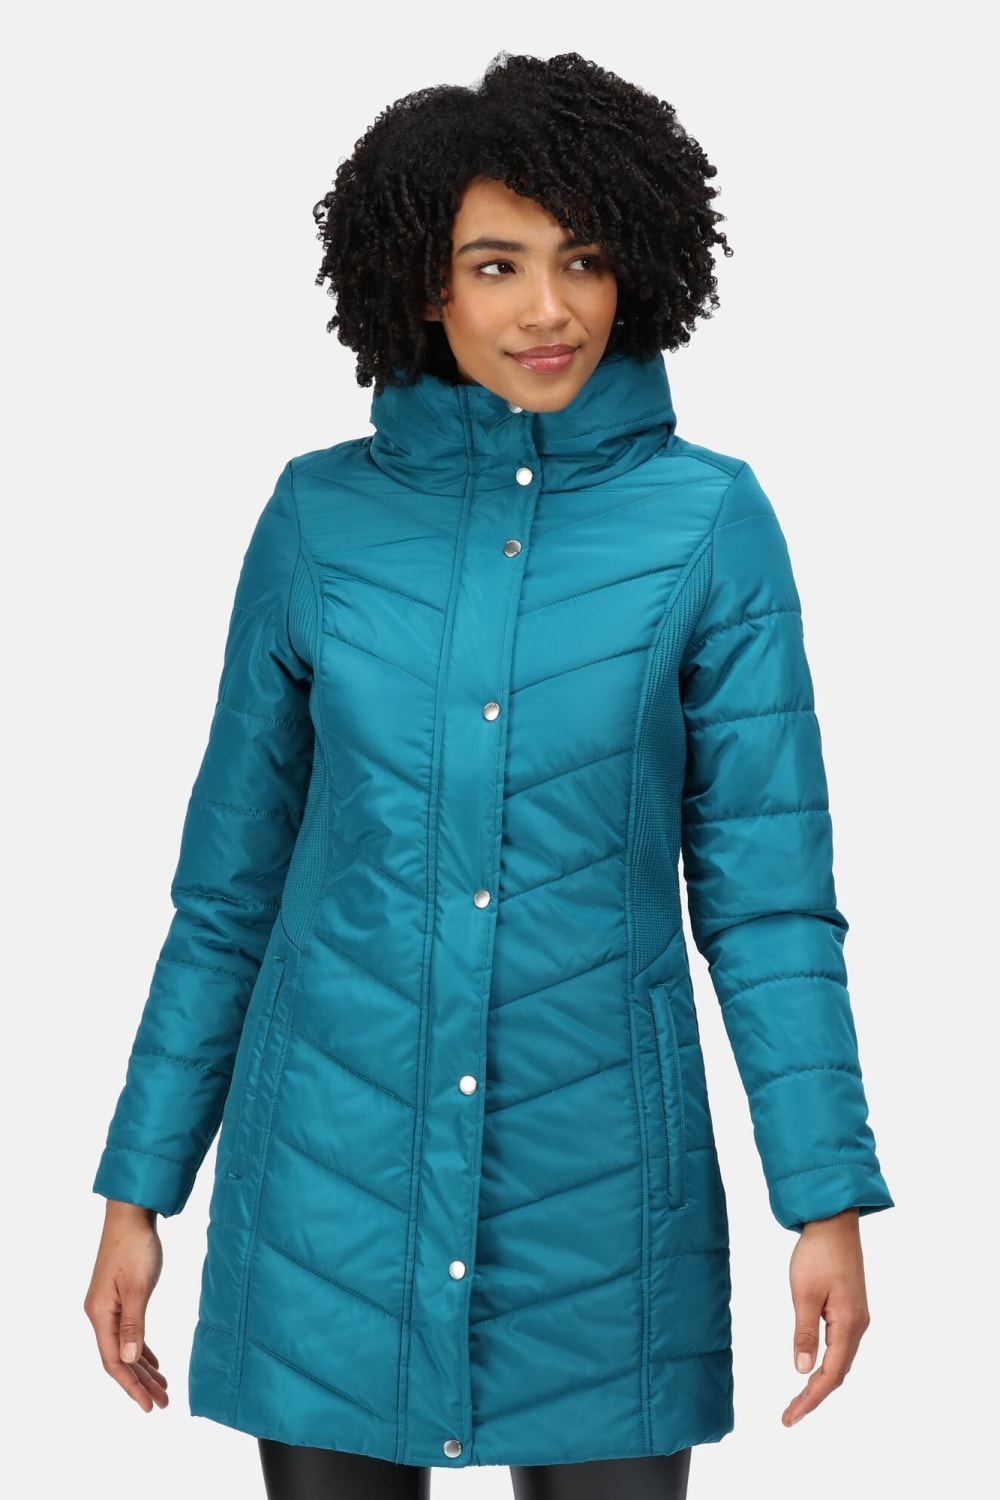 Womens Parthenia Rochelle Humes Insulated Parka Jacket - Gulfstream